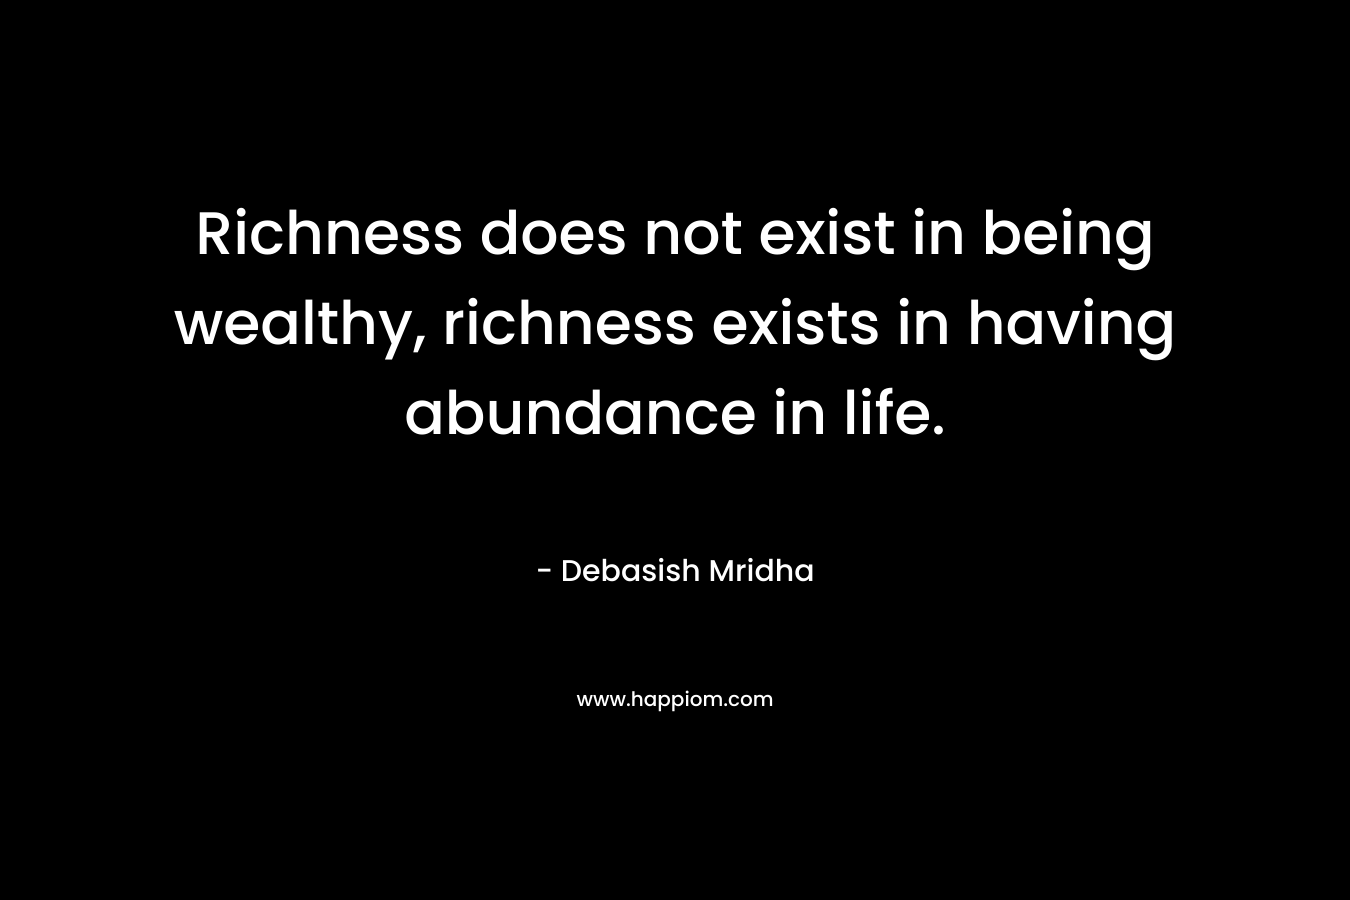 Richness does not exist in being wealthy, richness exists in having abundance in life.